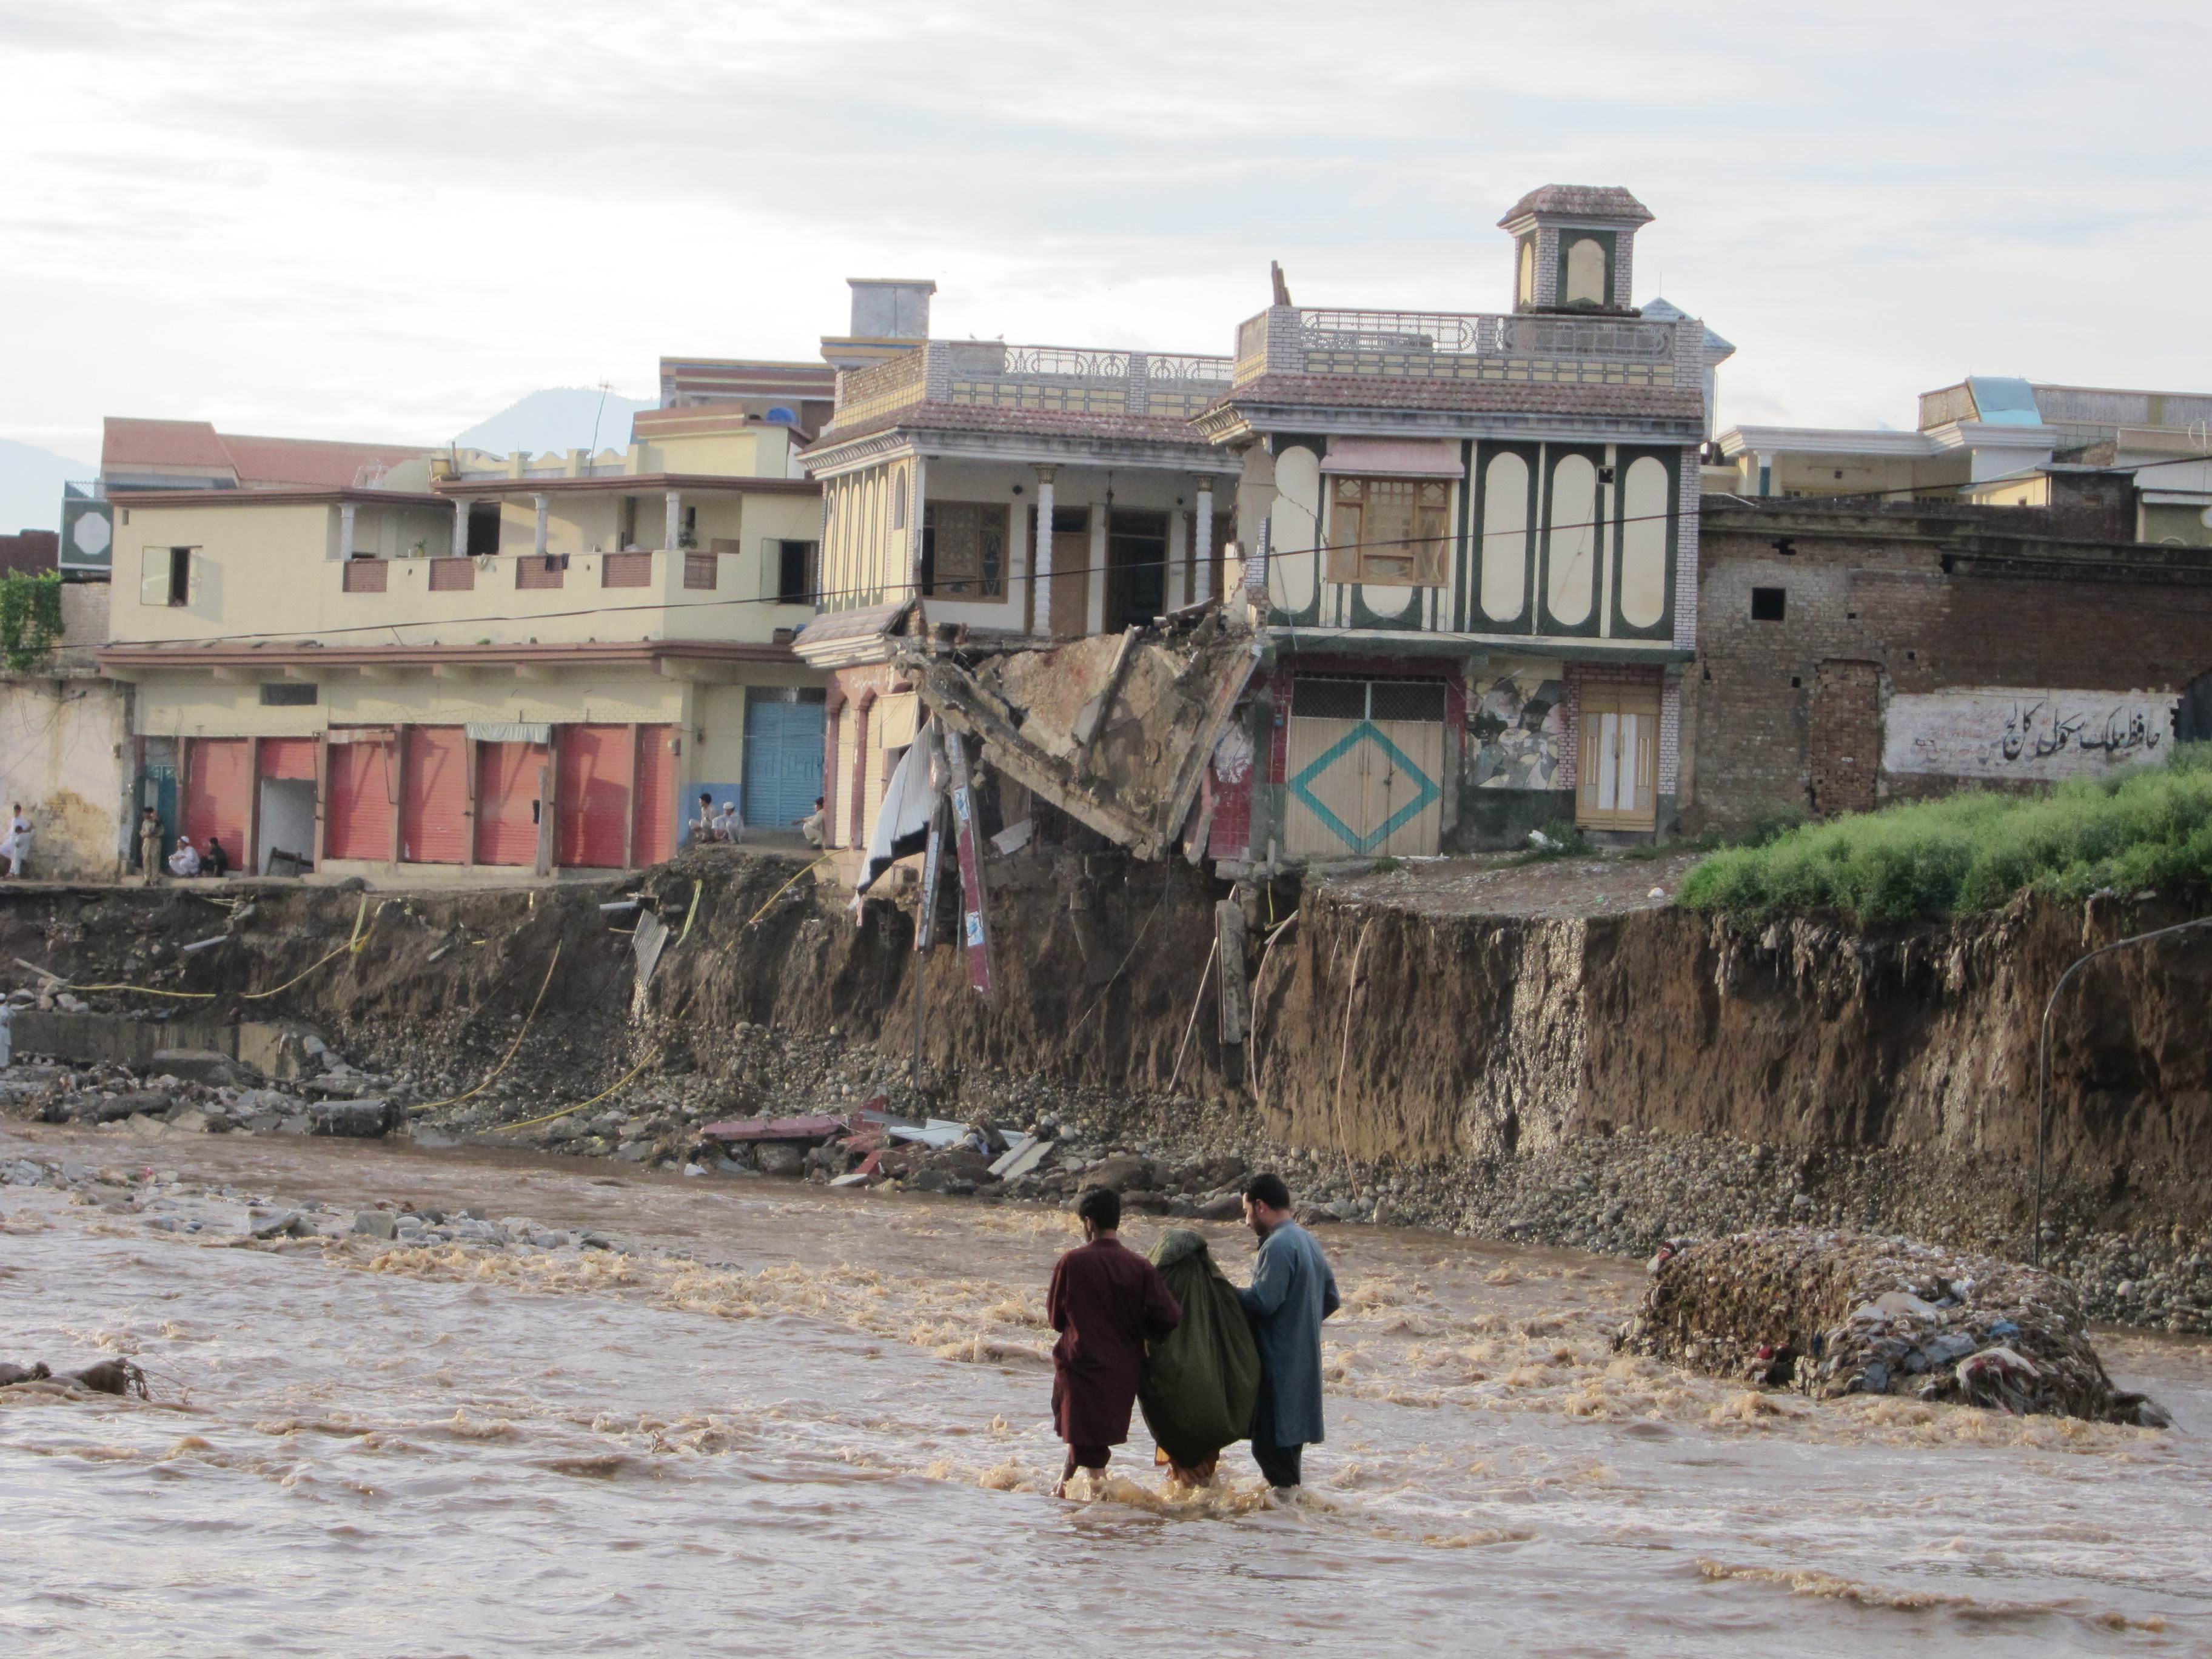 Children walking by a neighborhood destroyed by flooding